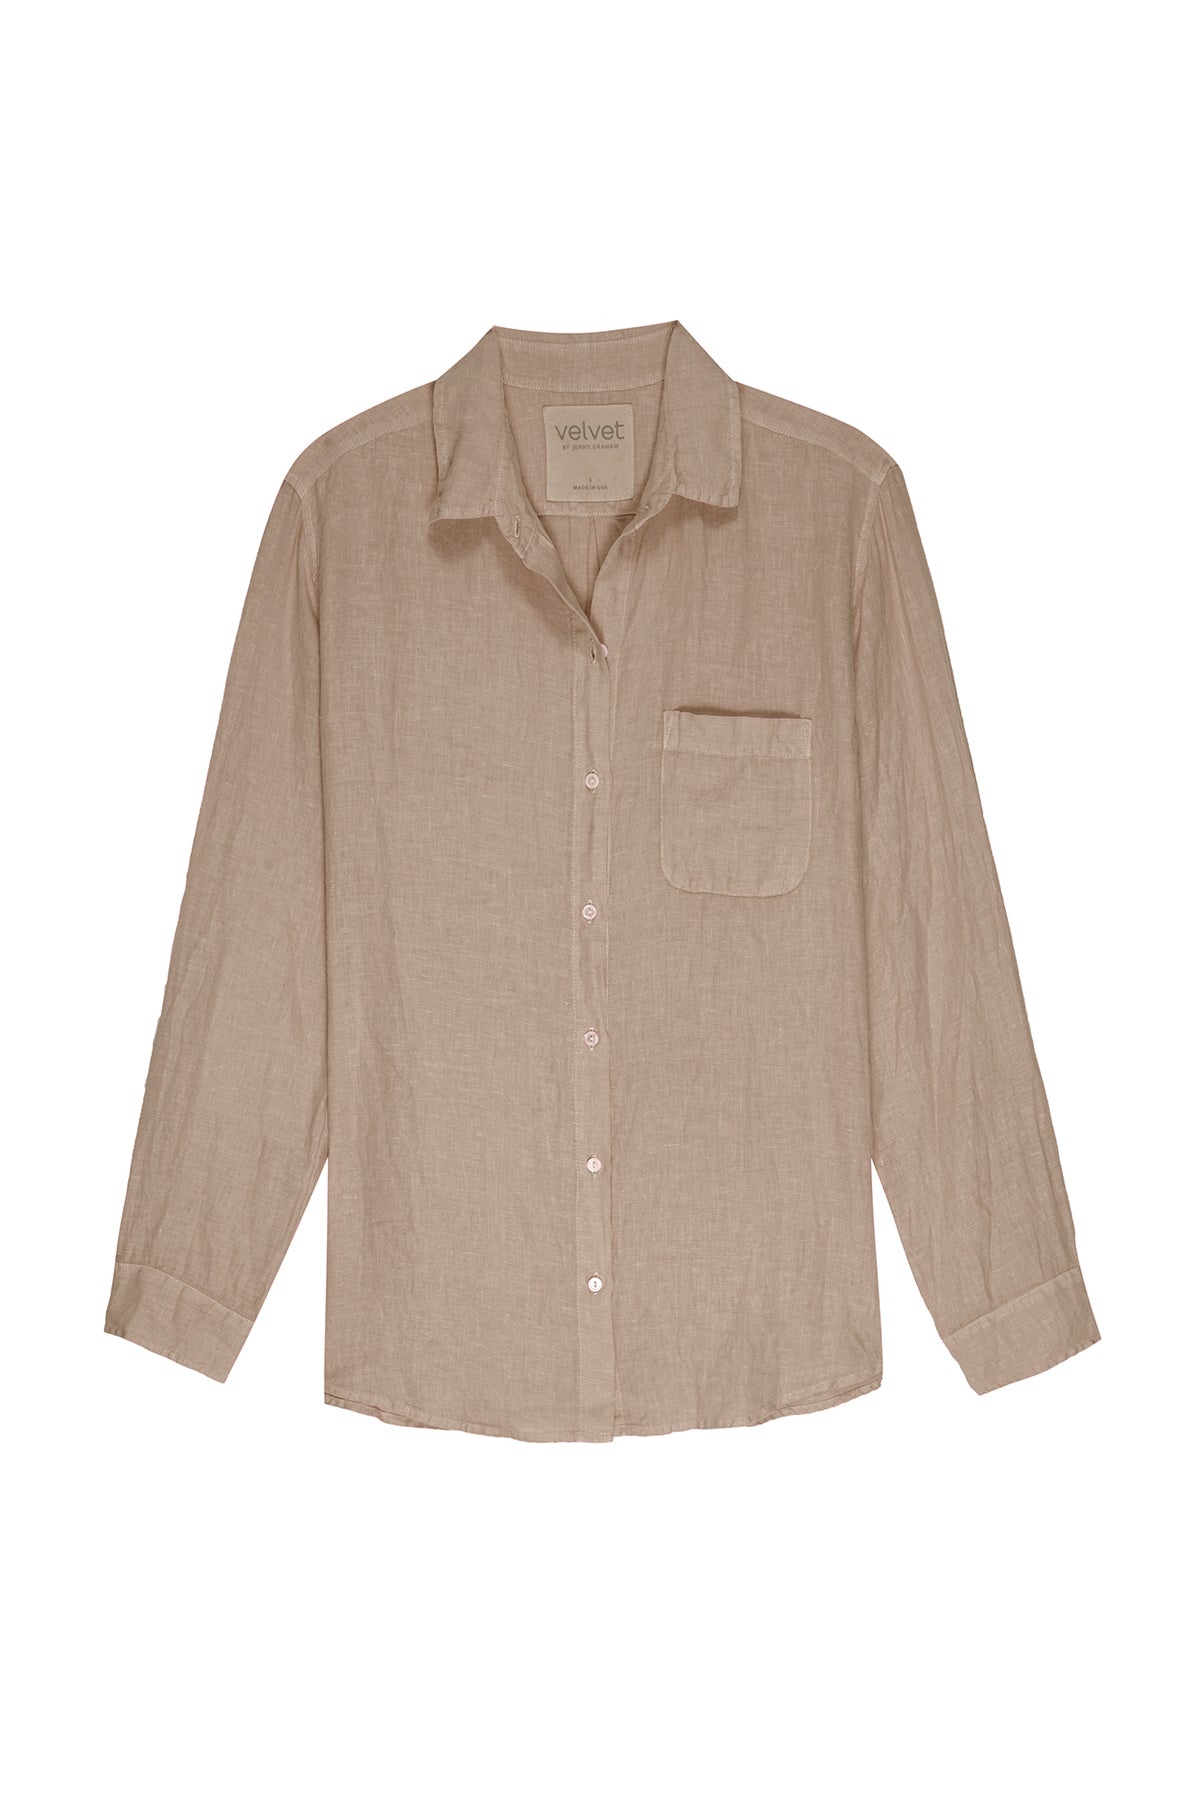 A beige MULHOLLAND LINEN SHIRT by Velvet by Jenny Graham with a single chest pocket, a collar, and a relaxed silhouette featuring a scooped hemline.-26040391696577